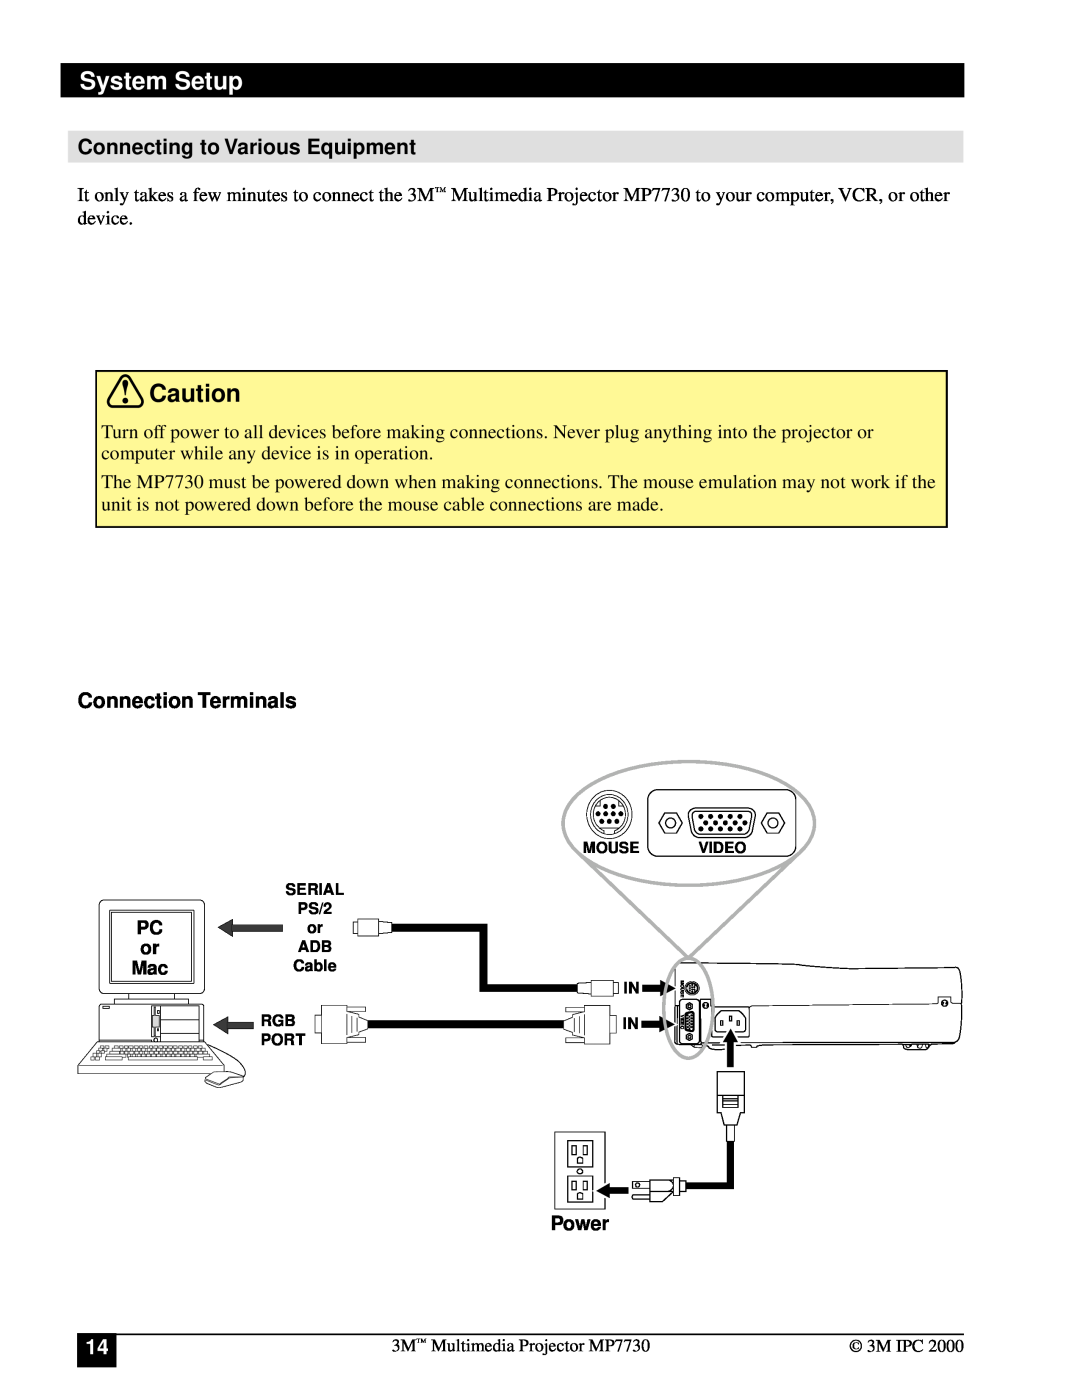 Apple MP7730 manual Connecting to Various Equipment, Connection Terminals, System Setup, Power 